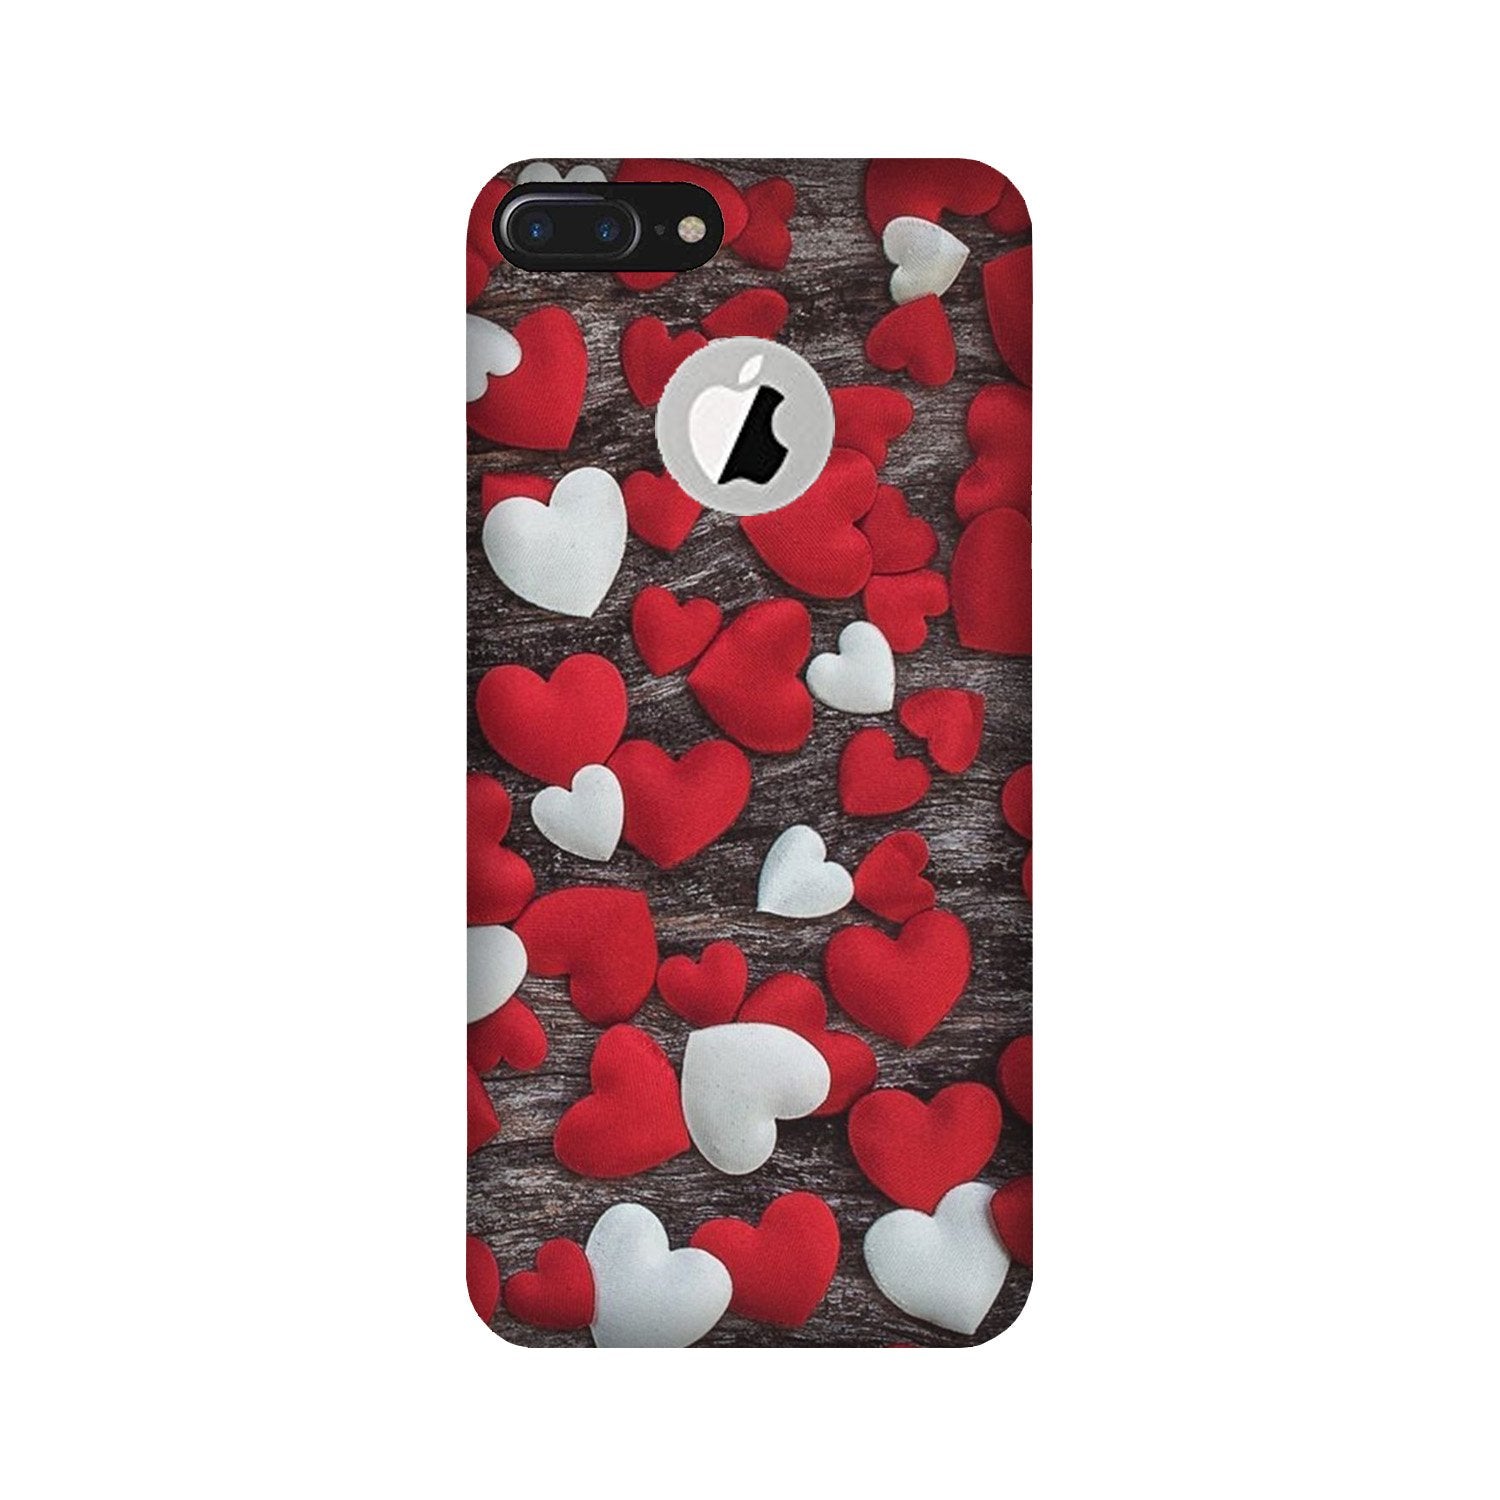 Red White Hearts Case for iPhone 7 Plus logo cut(Design - 105)